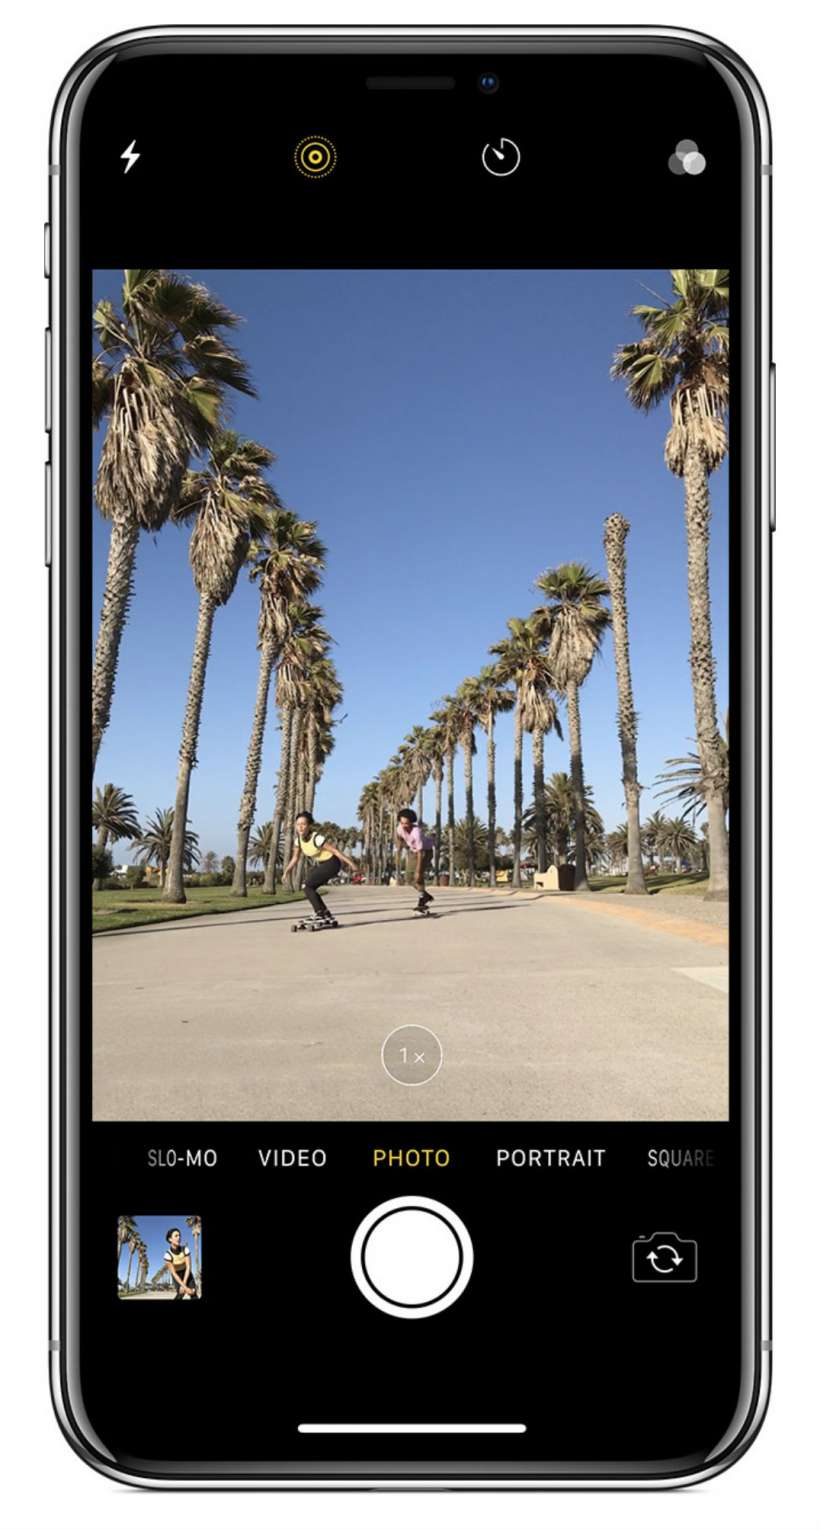 How to combine Live Photos into videos on iPhone